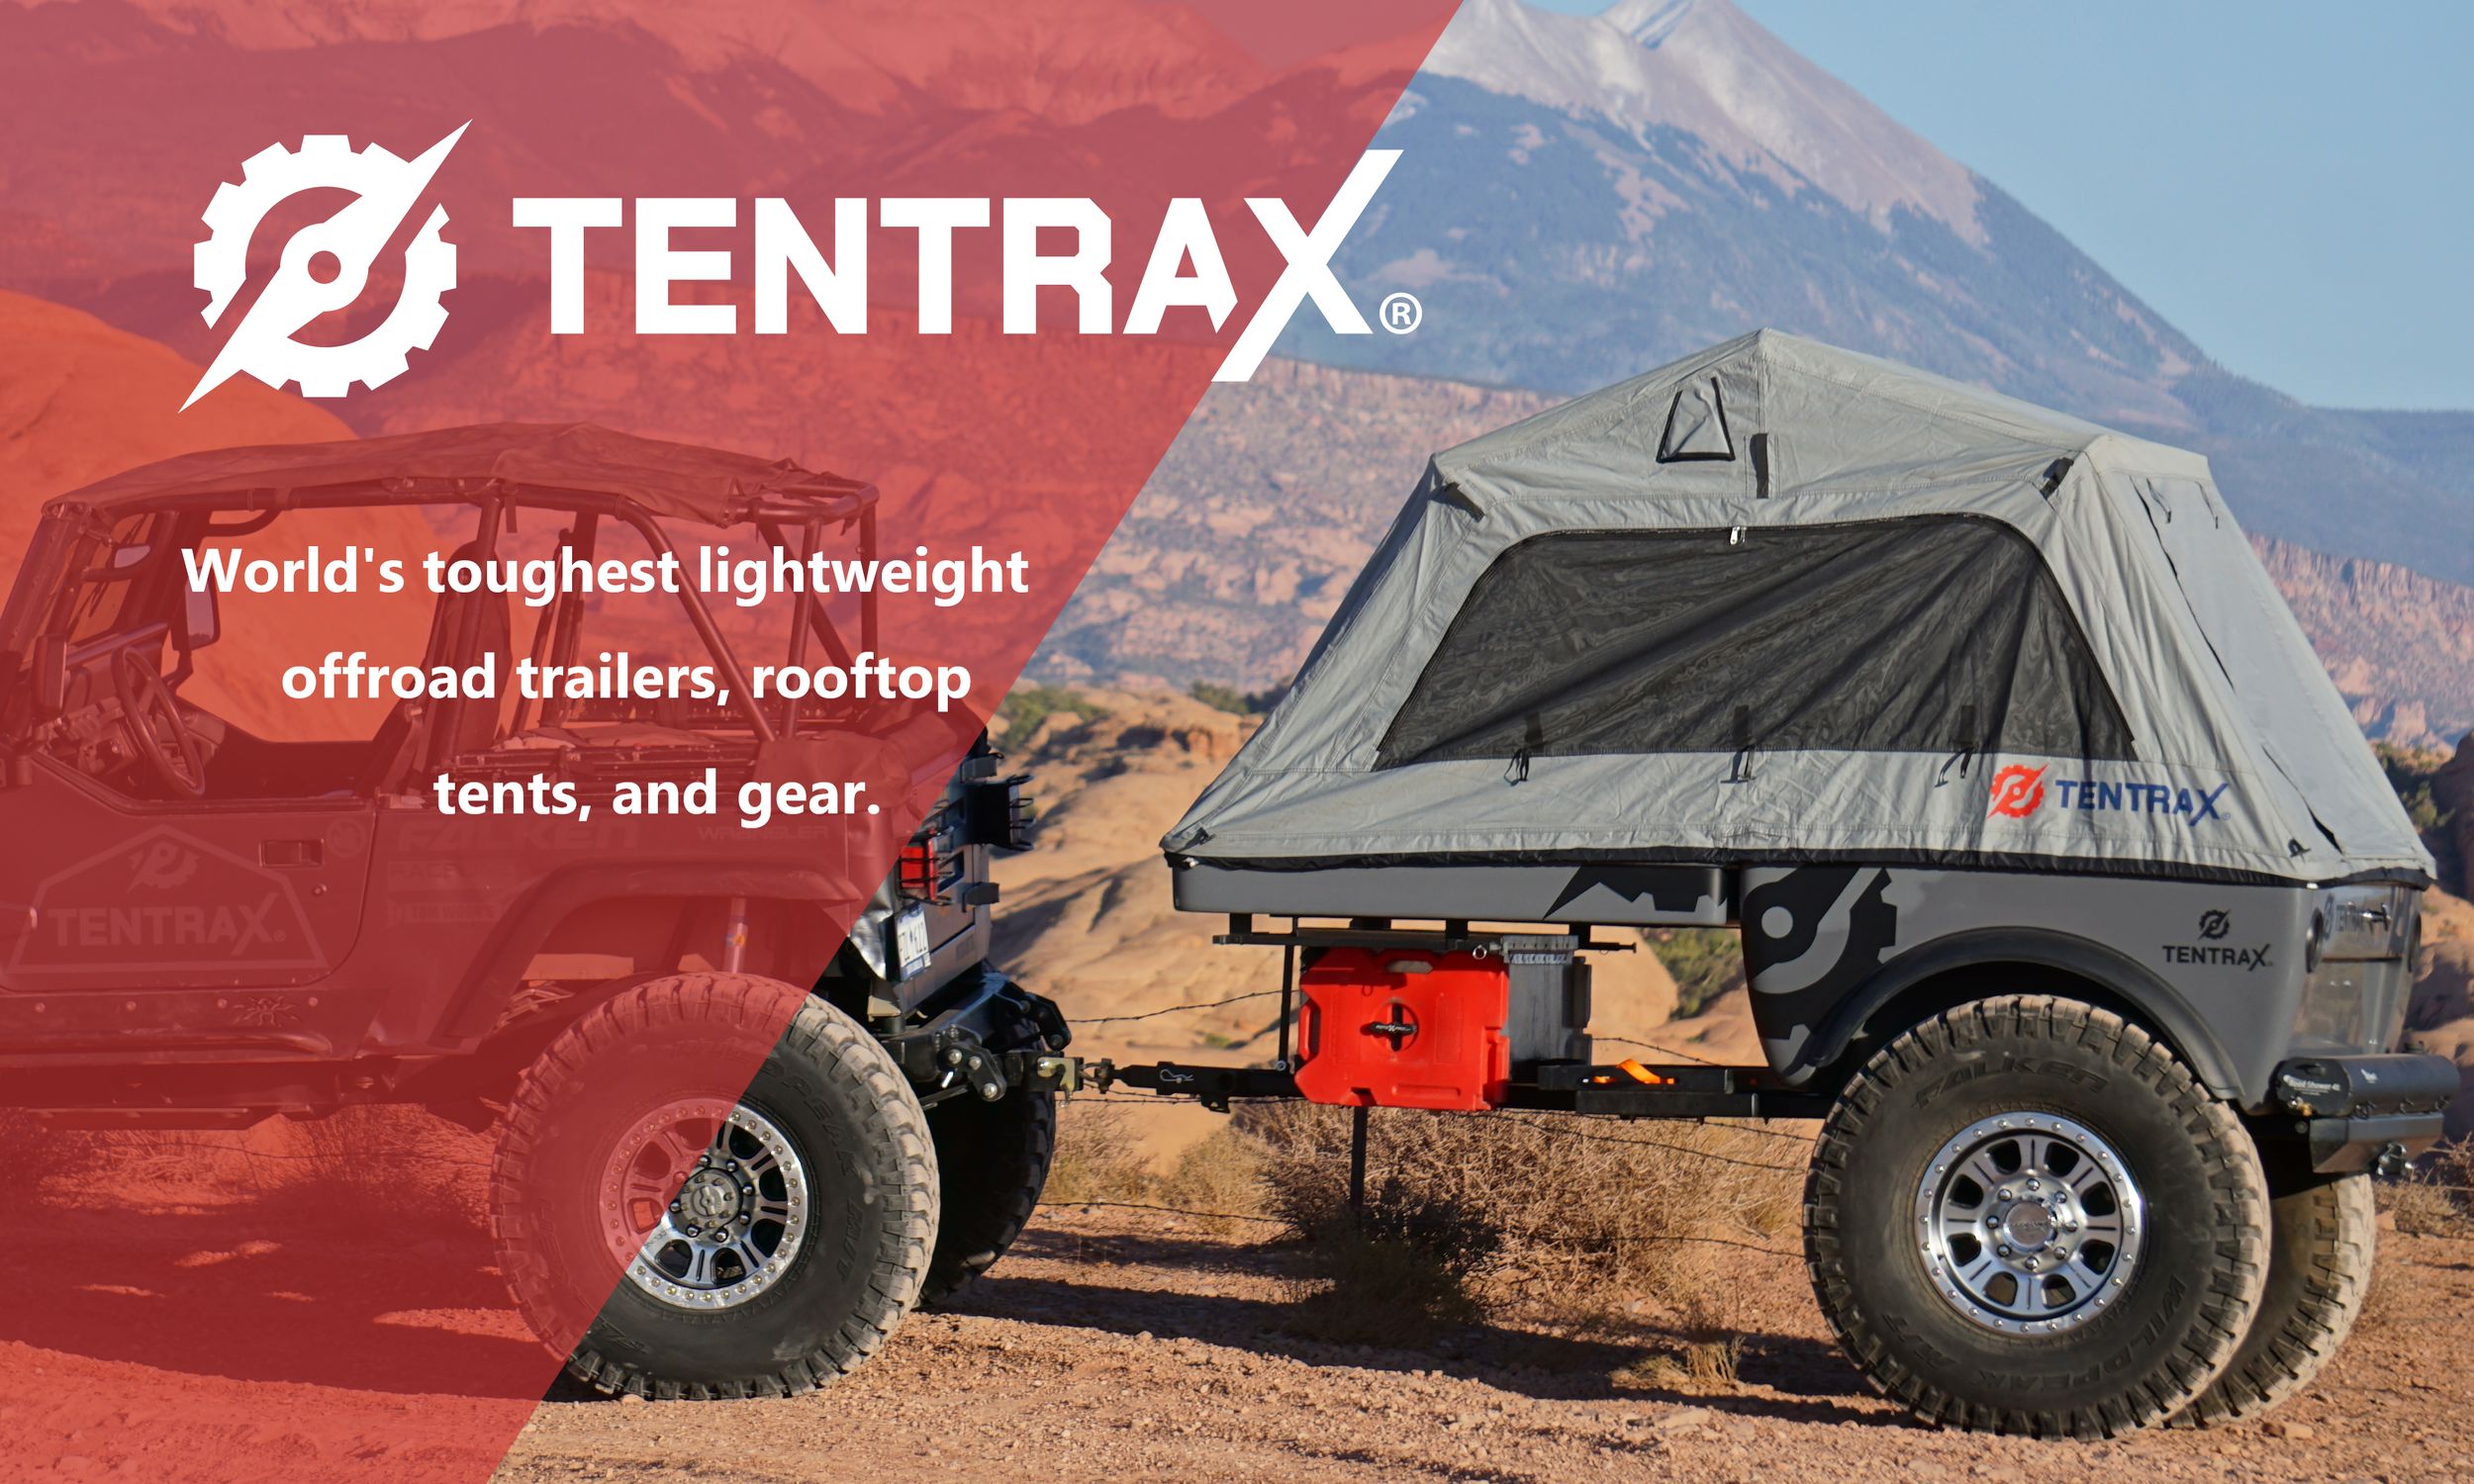 Frank Worthley doorgaan met Schrijfmachine TENTRAX : Lightweight, compact, tough offroad tent trailers! Overland  trailers | Off-Road Camping Trailer | Off Road Camper | Jeep Trailer Camper  | Custom Camper Trailers | Contact us for a custom quote!